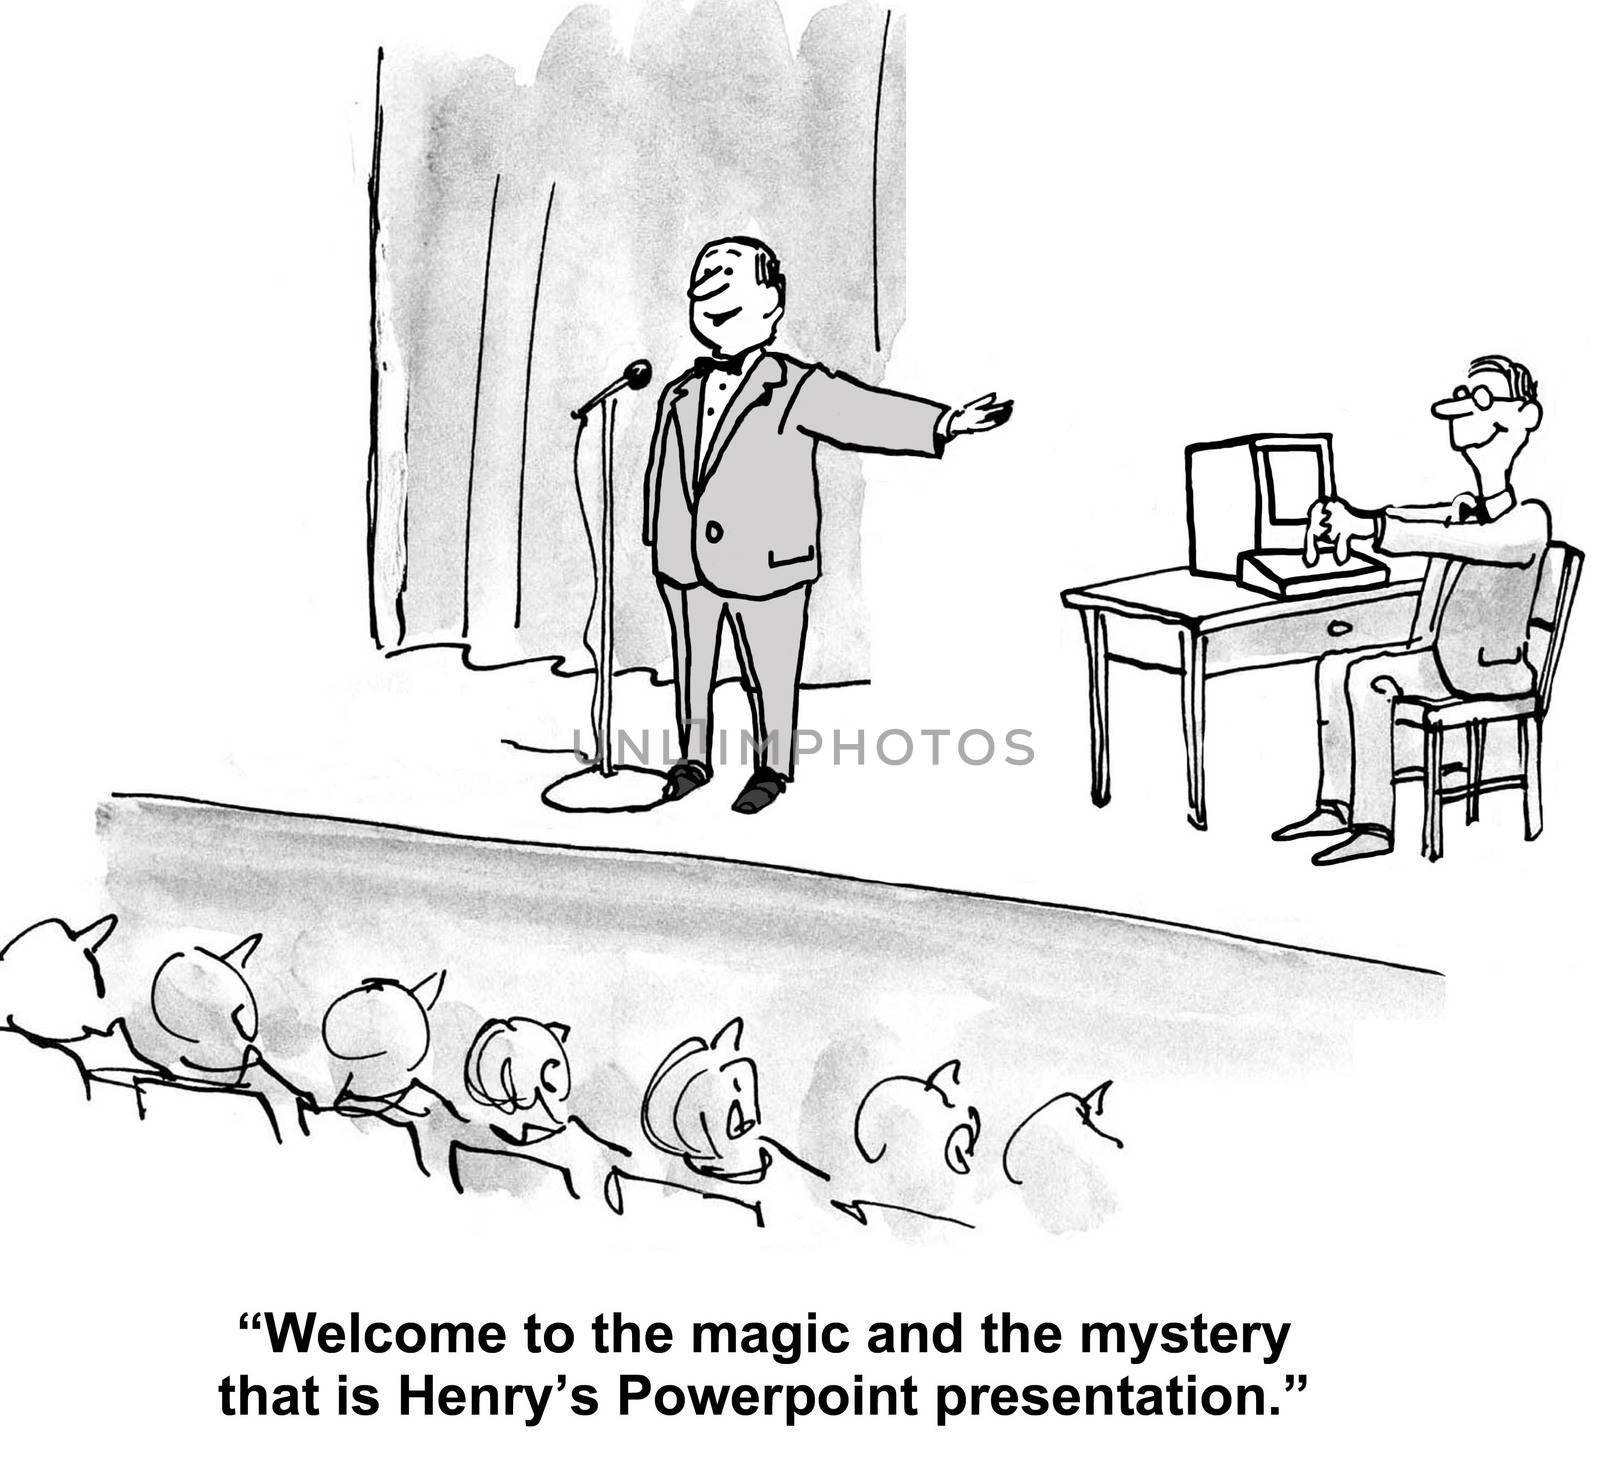 "Welcome to the magic and the mystery."